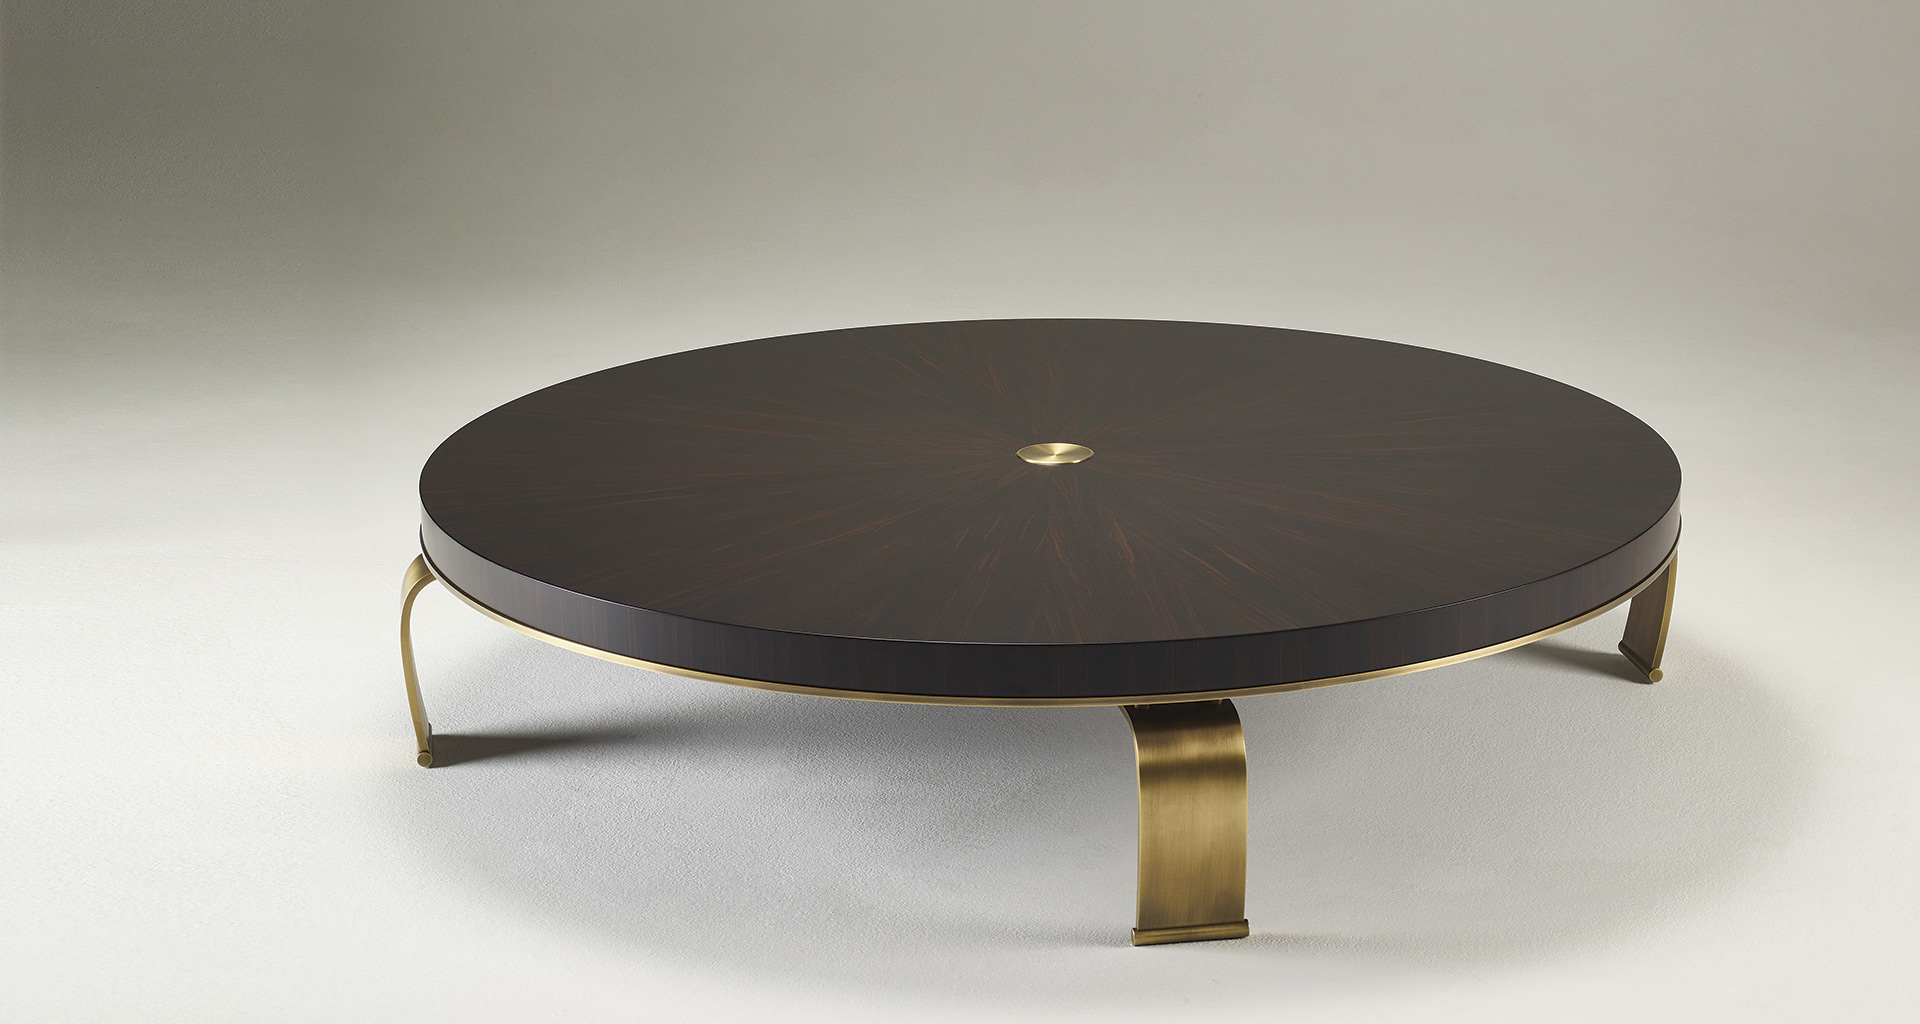 Sumo is an oval, rectangular or circular coffee table with wooden top and bronze legs, from Promemoria's Sun Tales collection | Promemoria